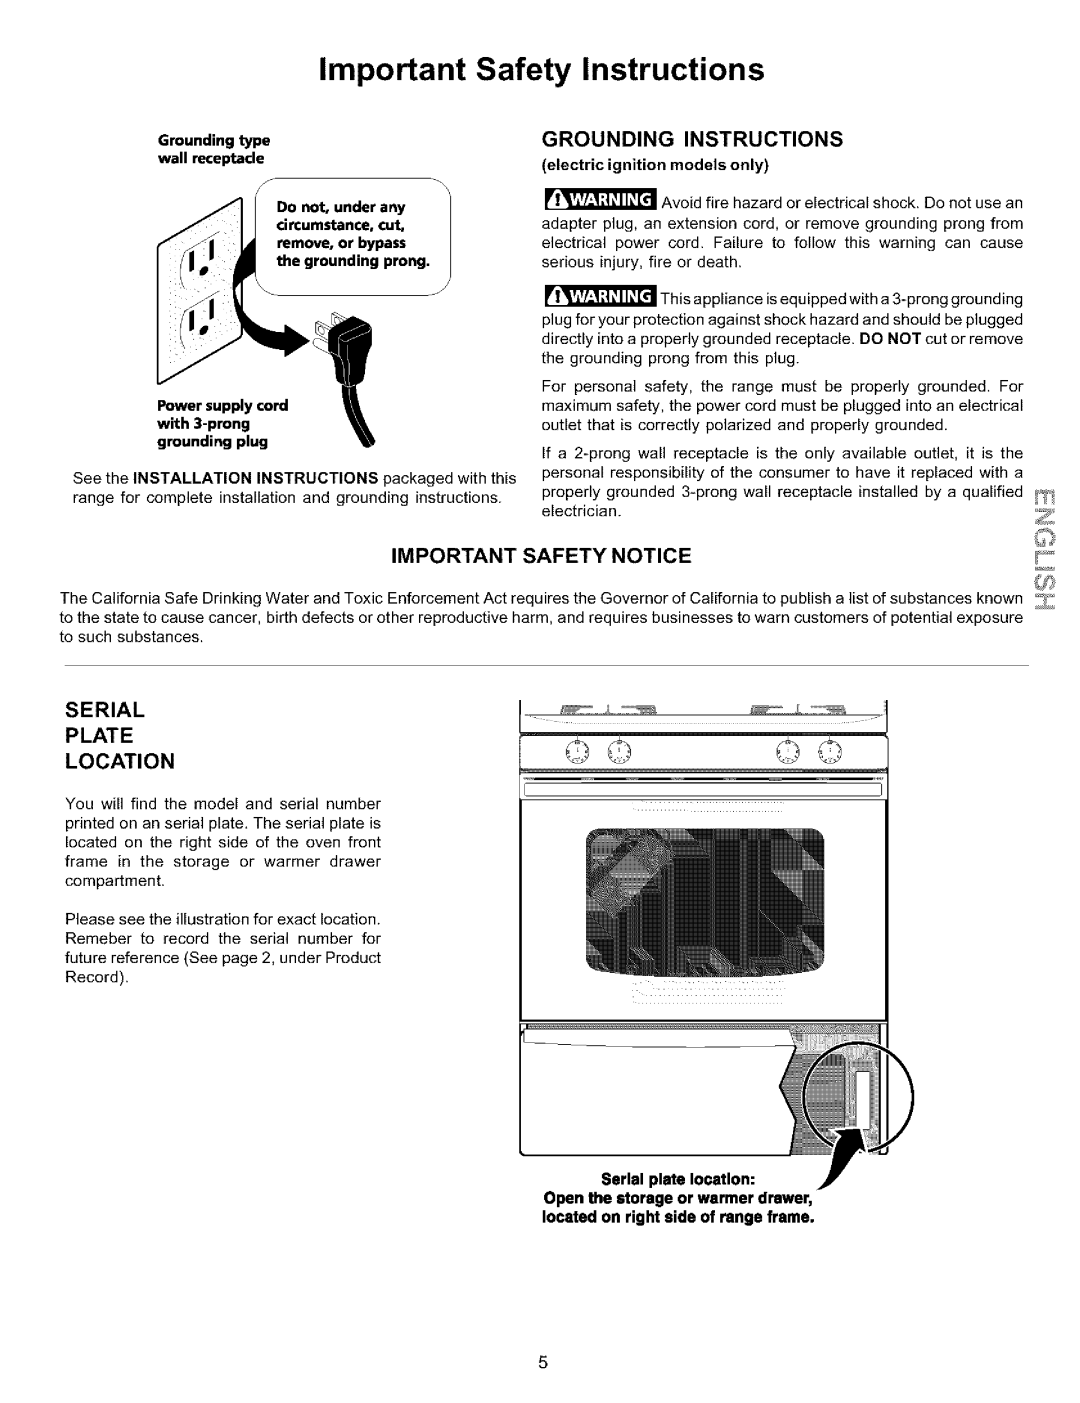 Kenmore 970-334420 Important Safety Instructions, Grounding Instructions, Important Safety Notice, Serial, Plate, Location 